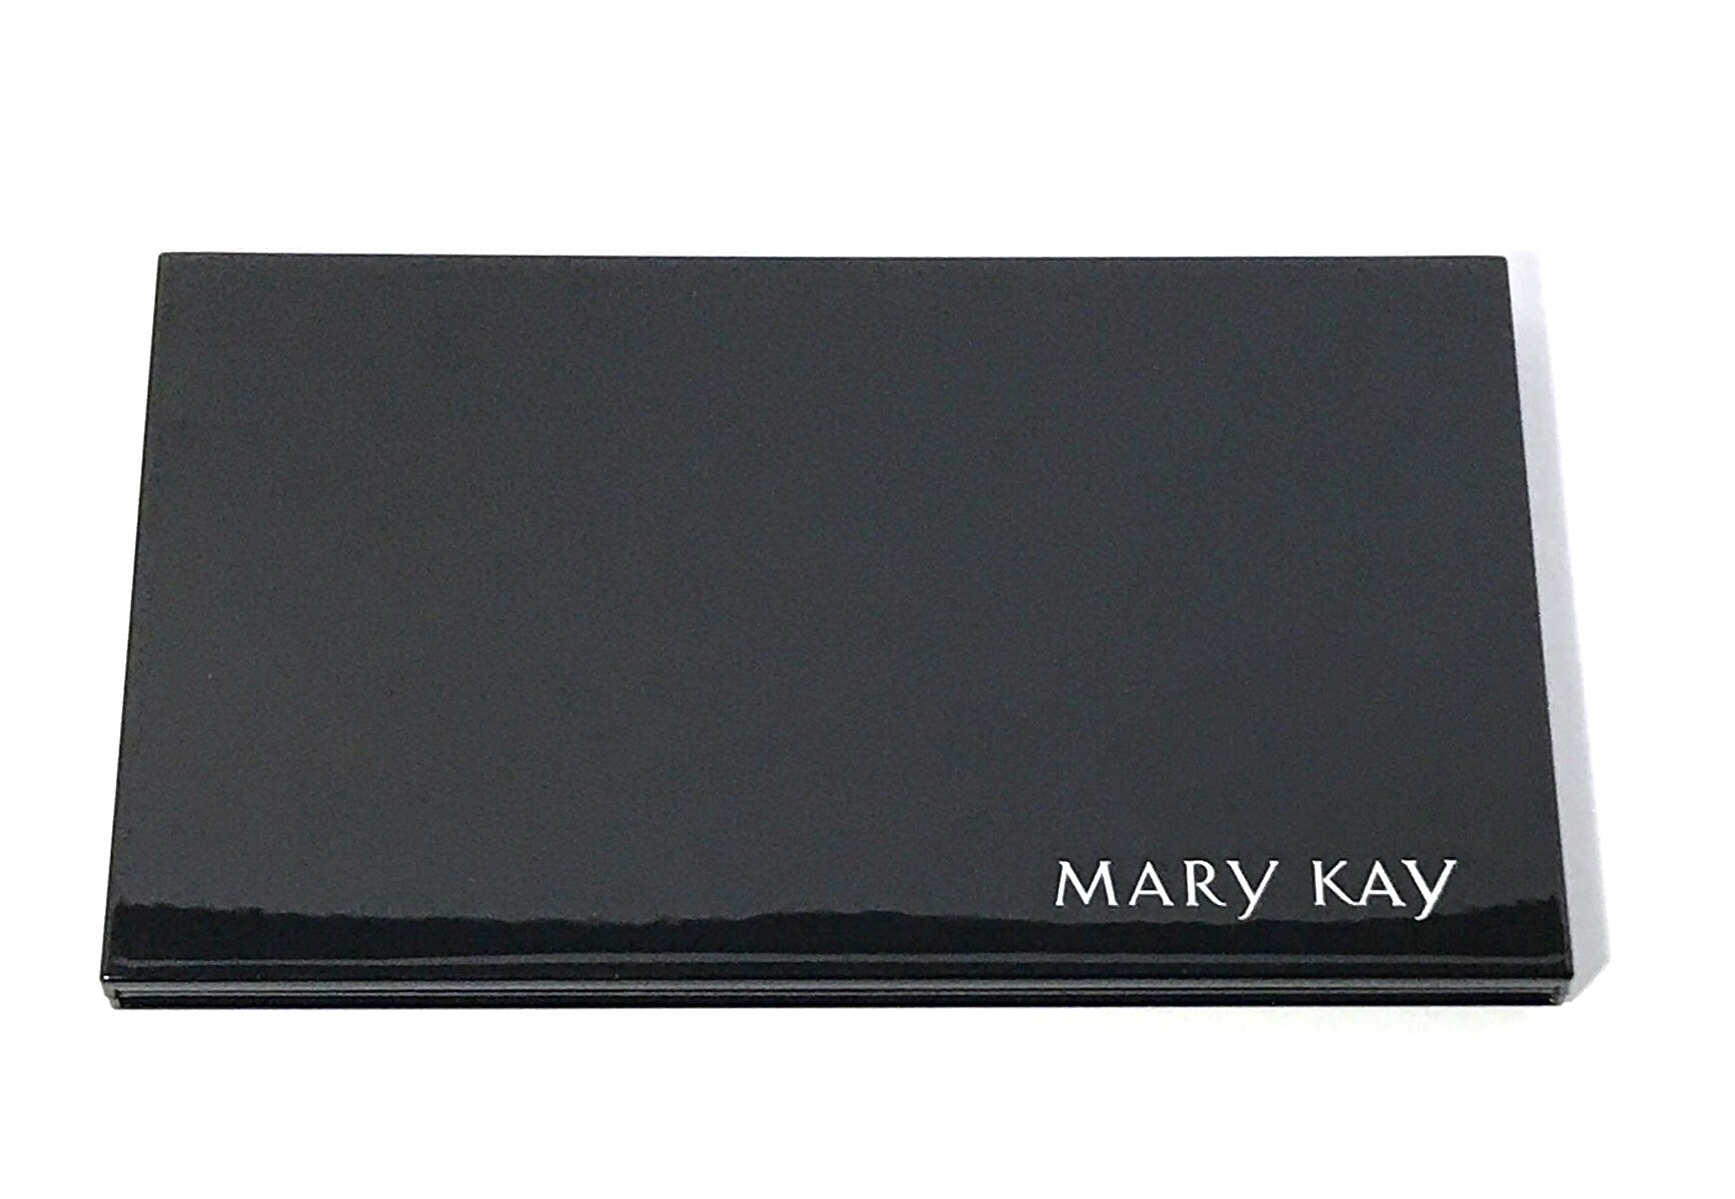 Mary Kay Single Use Makeup Palette Clear Plastic Trays 30 Count